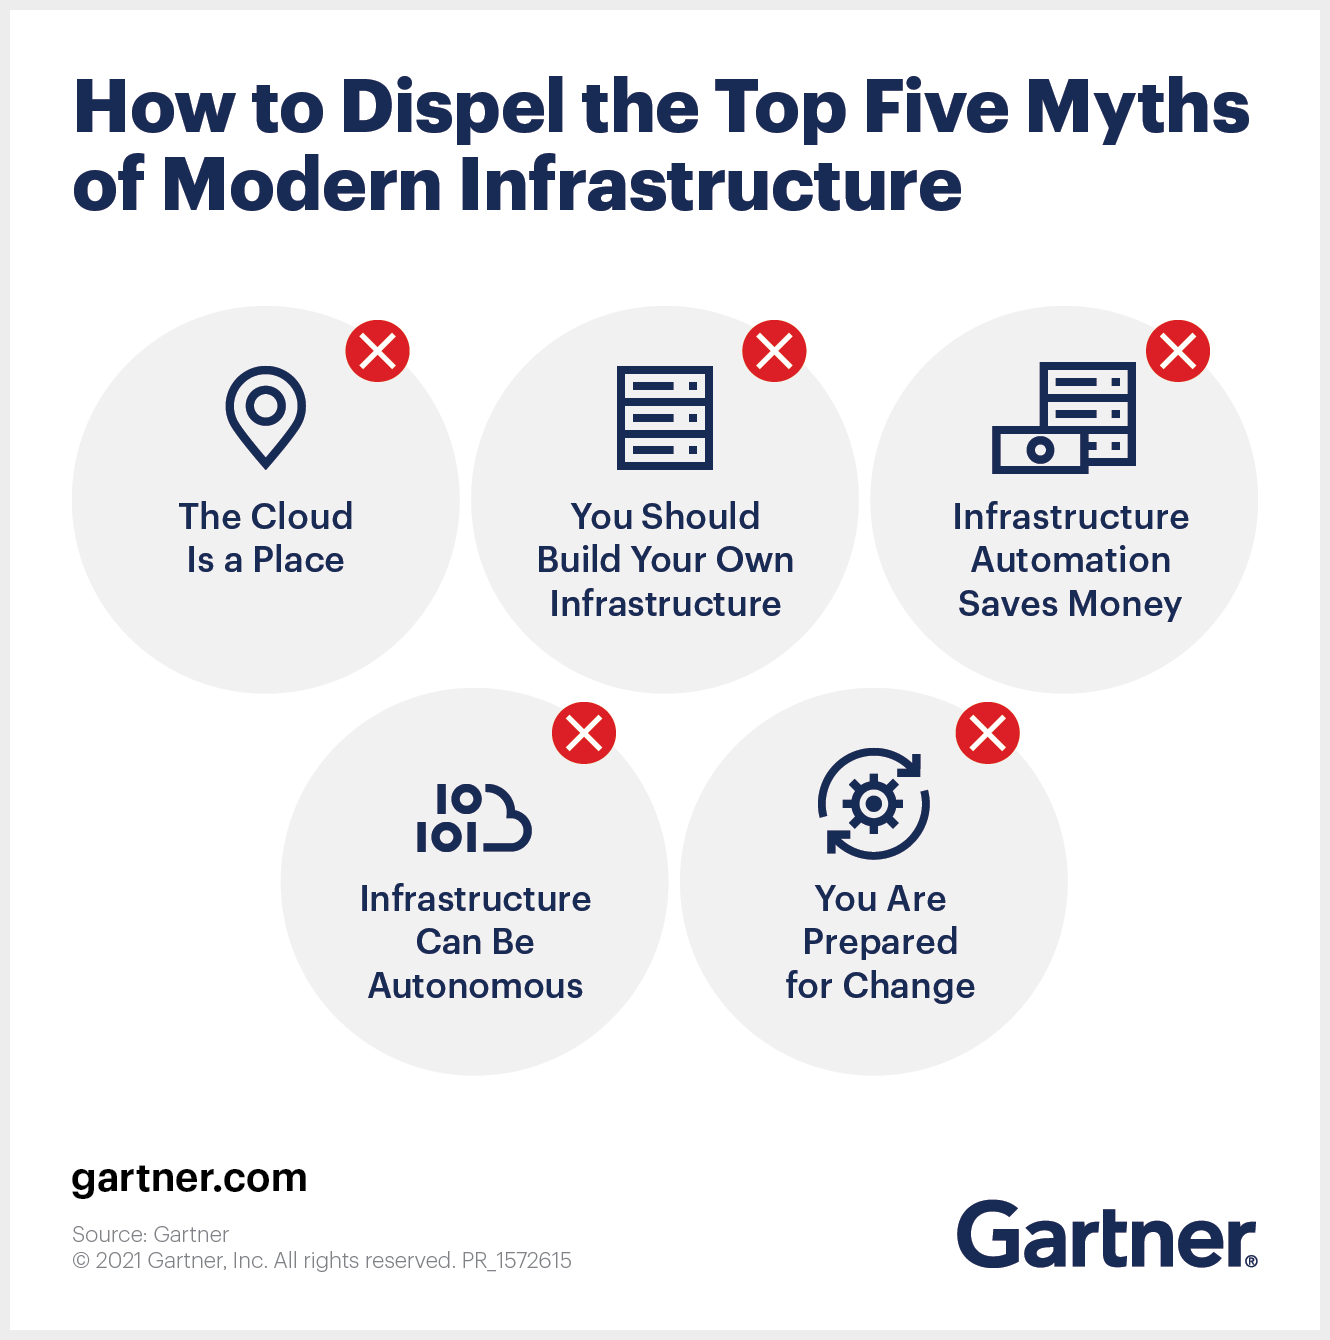 The graphic highlights five myths of modern infrastructure